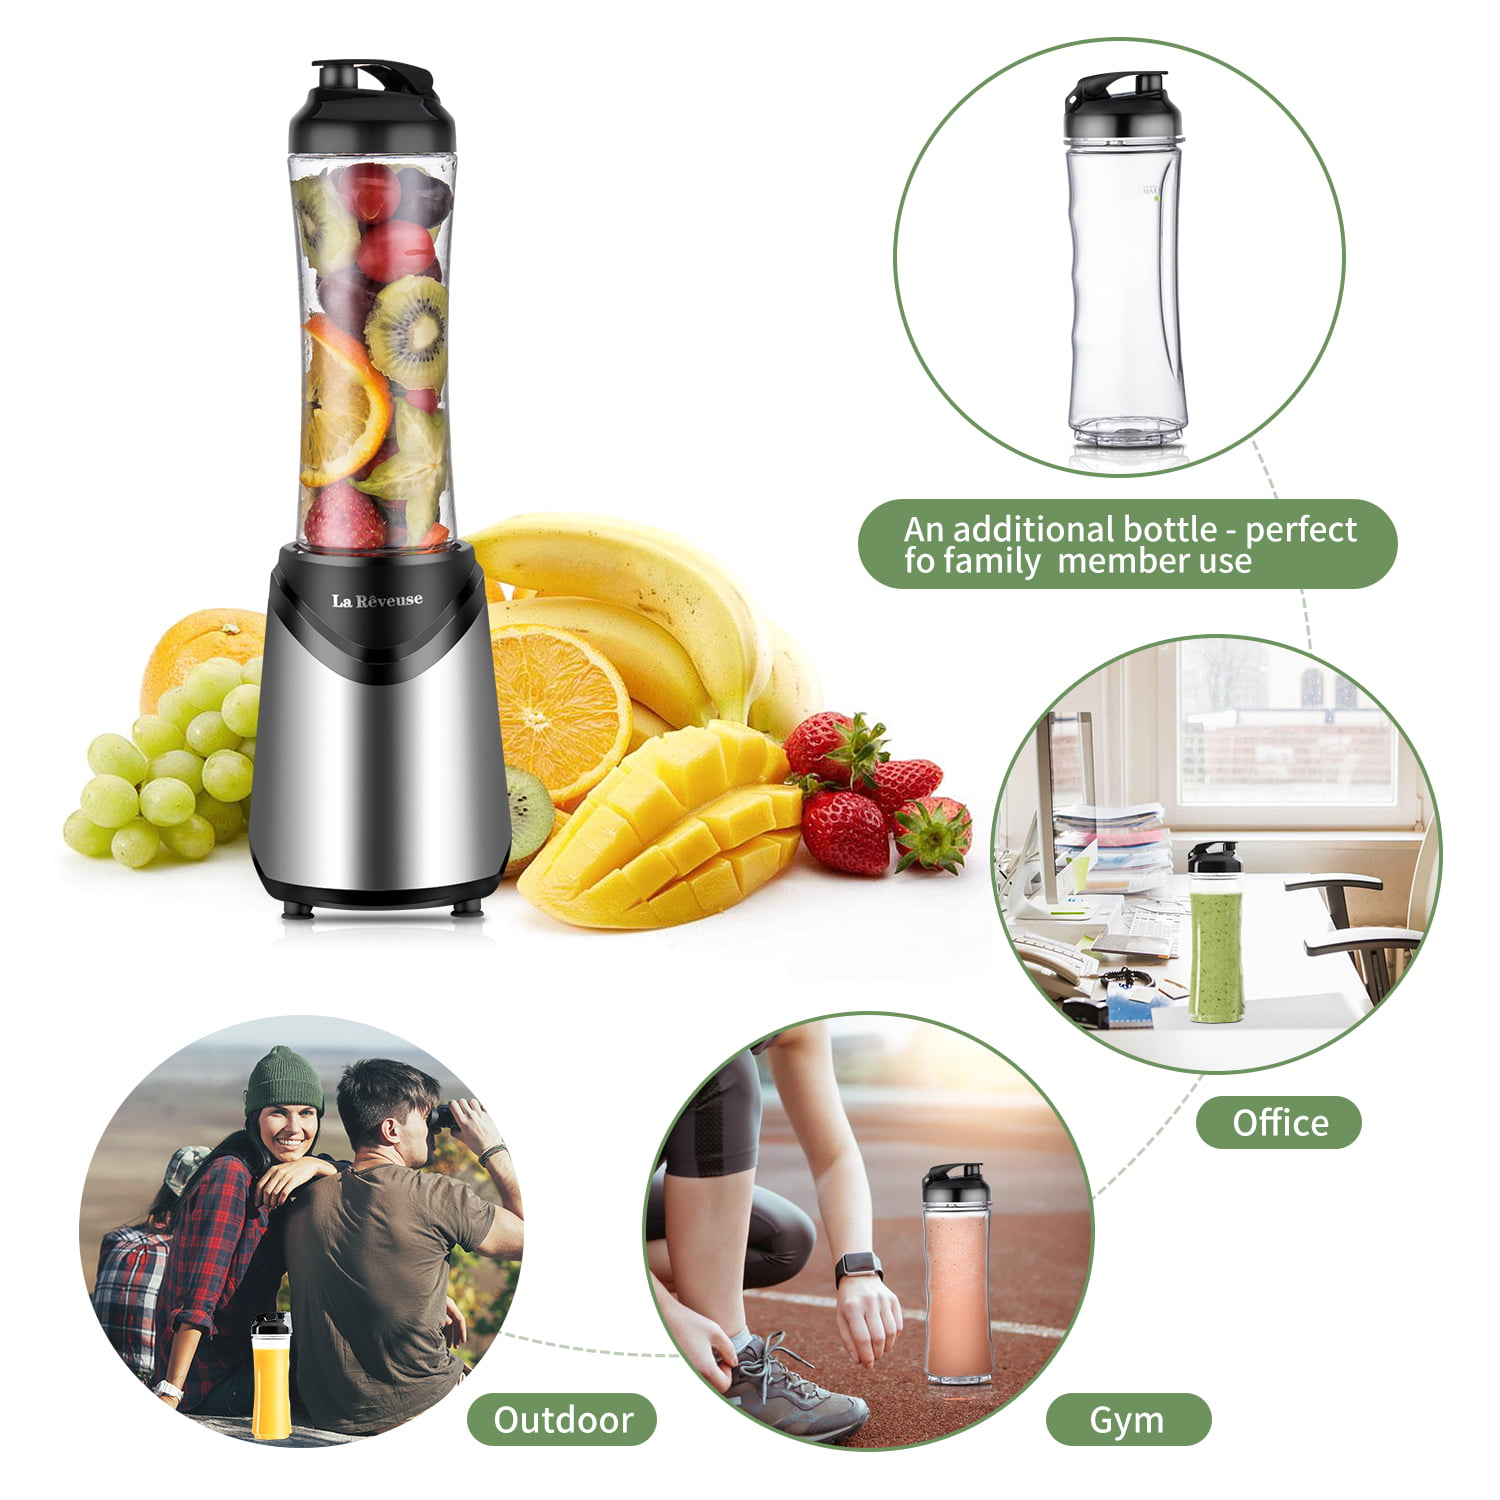  La Reveuse Personal Blender for Shakes and Smoothies